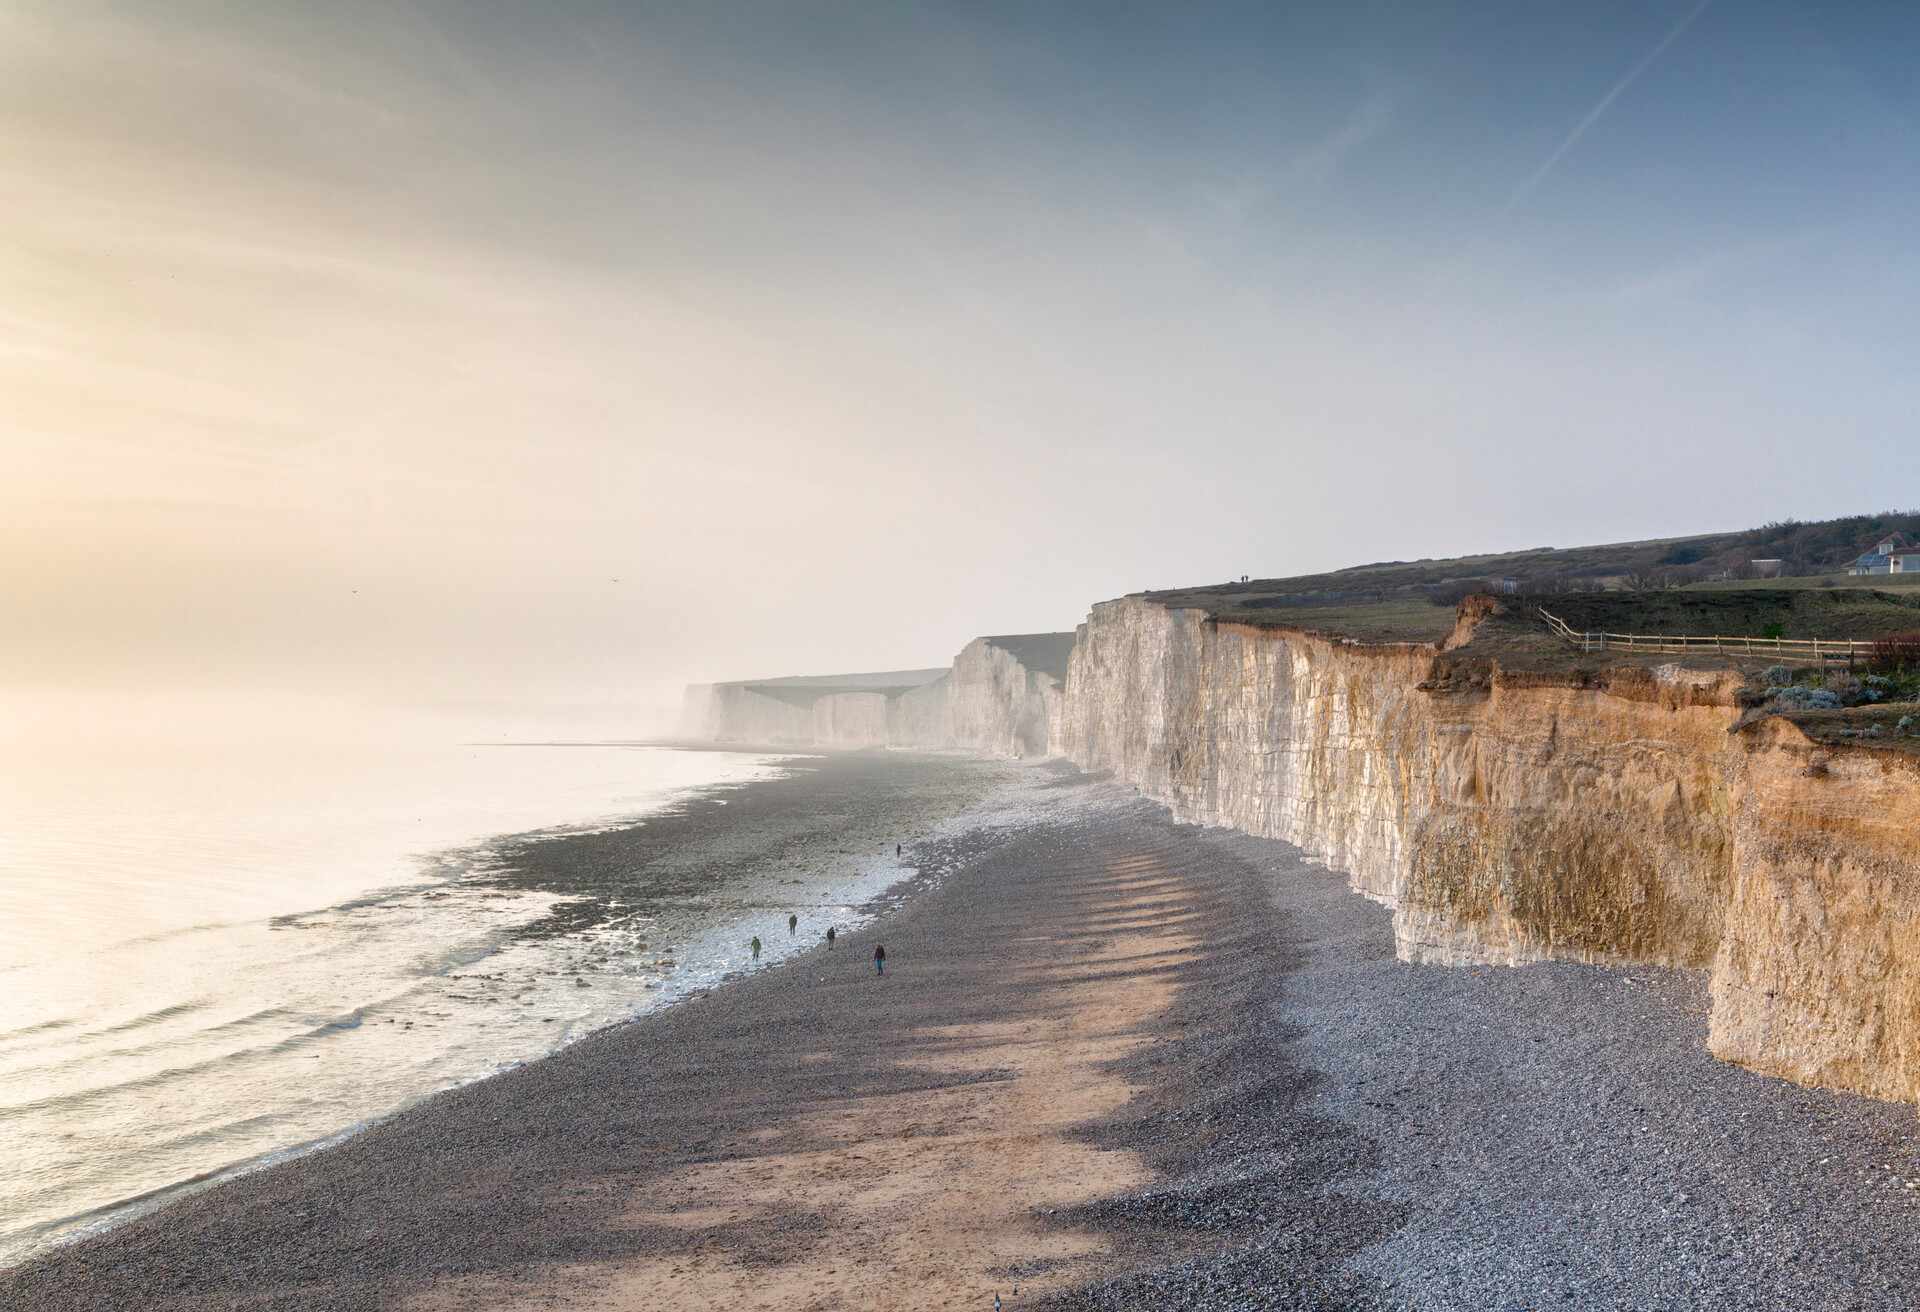 Overview of the cliffs from Birling Gap.